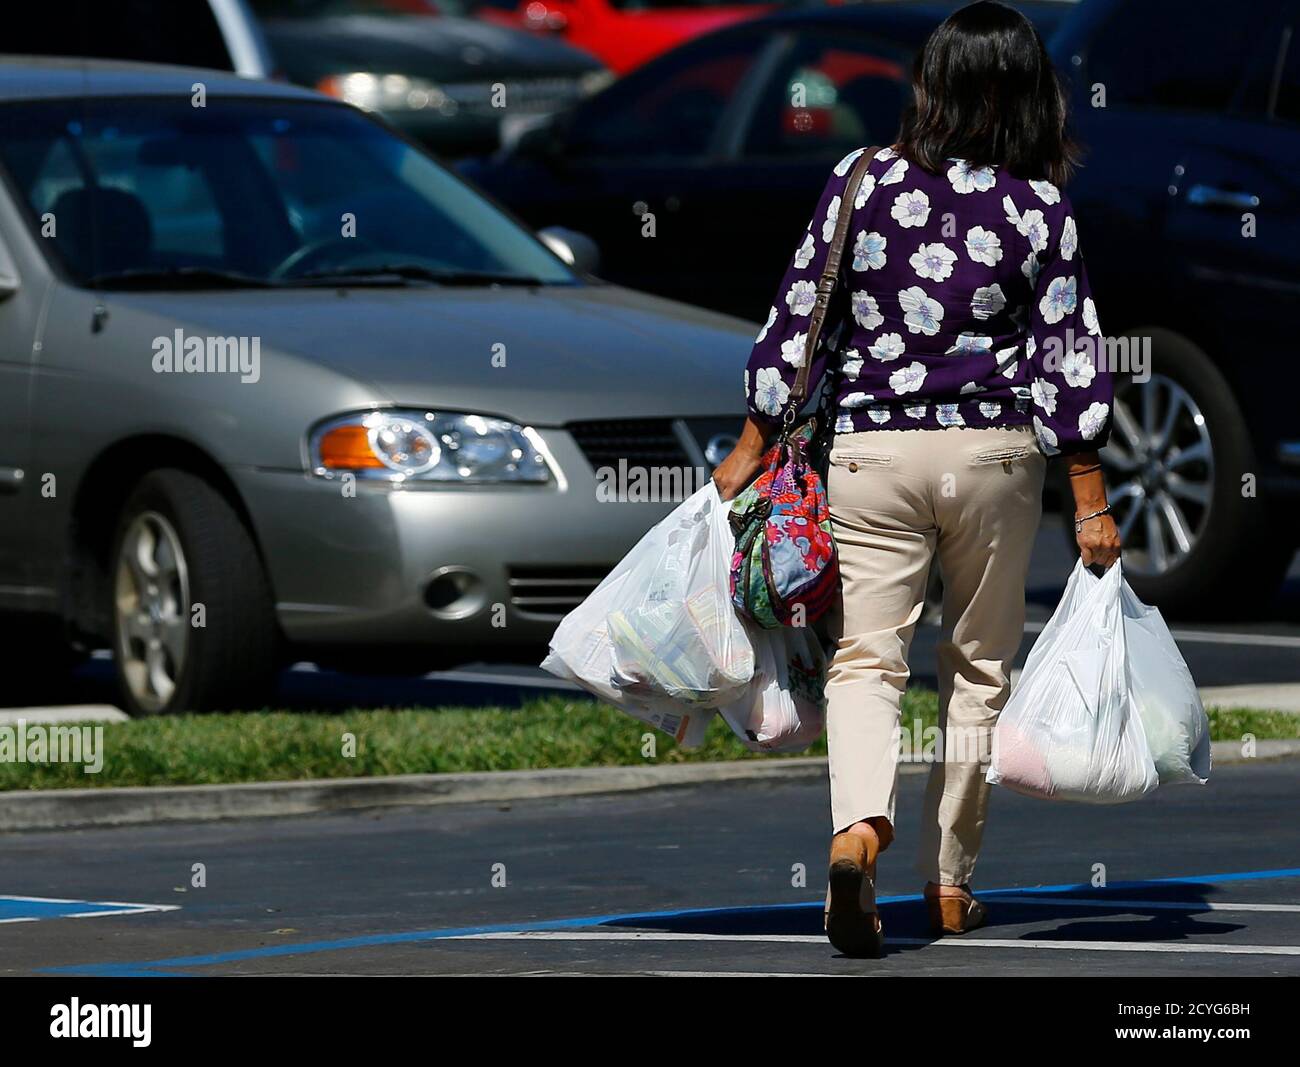 A shopper carries her groceries to her car in plastic bags after shopping at a Sprouts grocery store in San Diego, California September 30, 2014. Single-use plastic bags are set to disappear from California grocery stores over the next two years under a first-in-the-nation state law signed on Tuesday by Democratic Governor Jerry Brown, despite opposition from bag manufacturers.      REUTERS/Mike Blake (UNITED STATES - Tags: BUSINESS ENVIRONMENT) Stock Photo